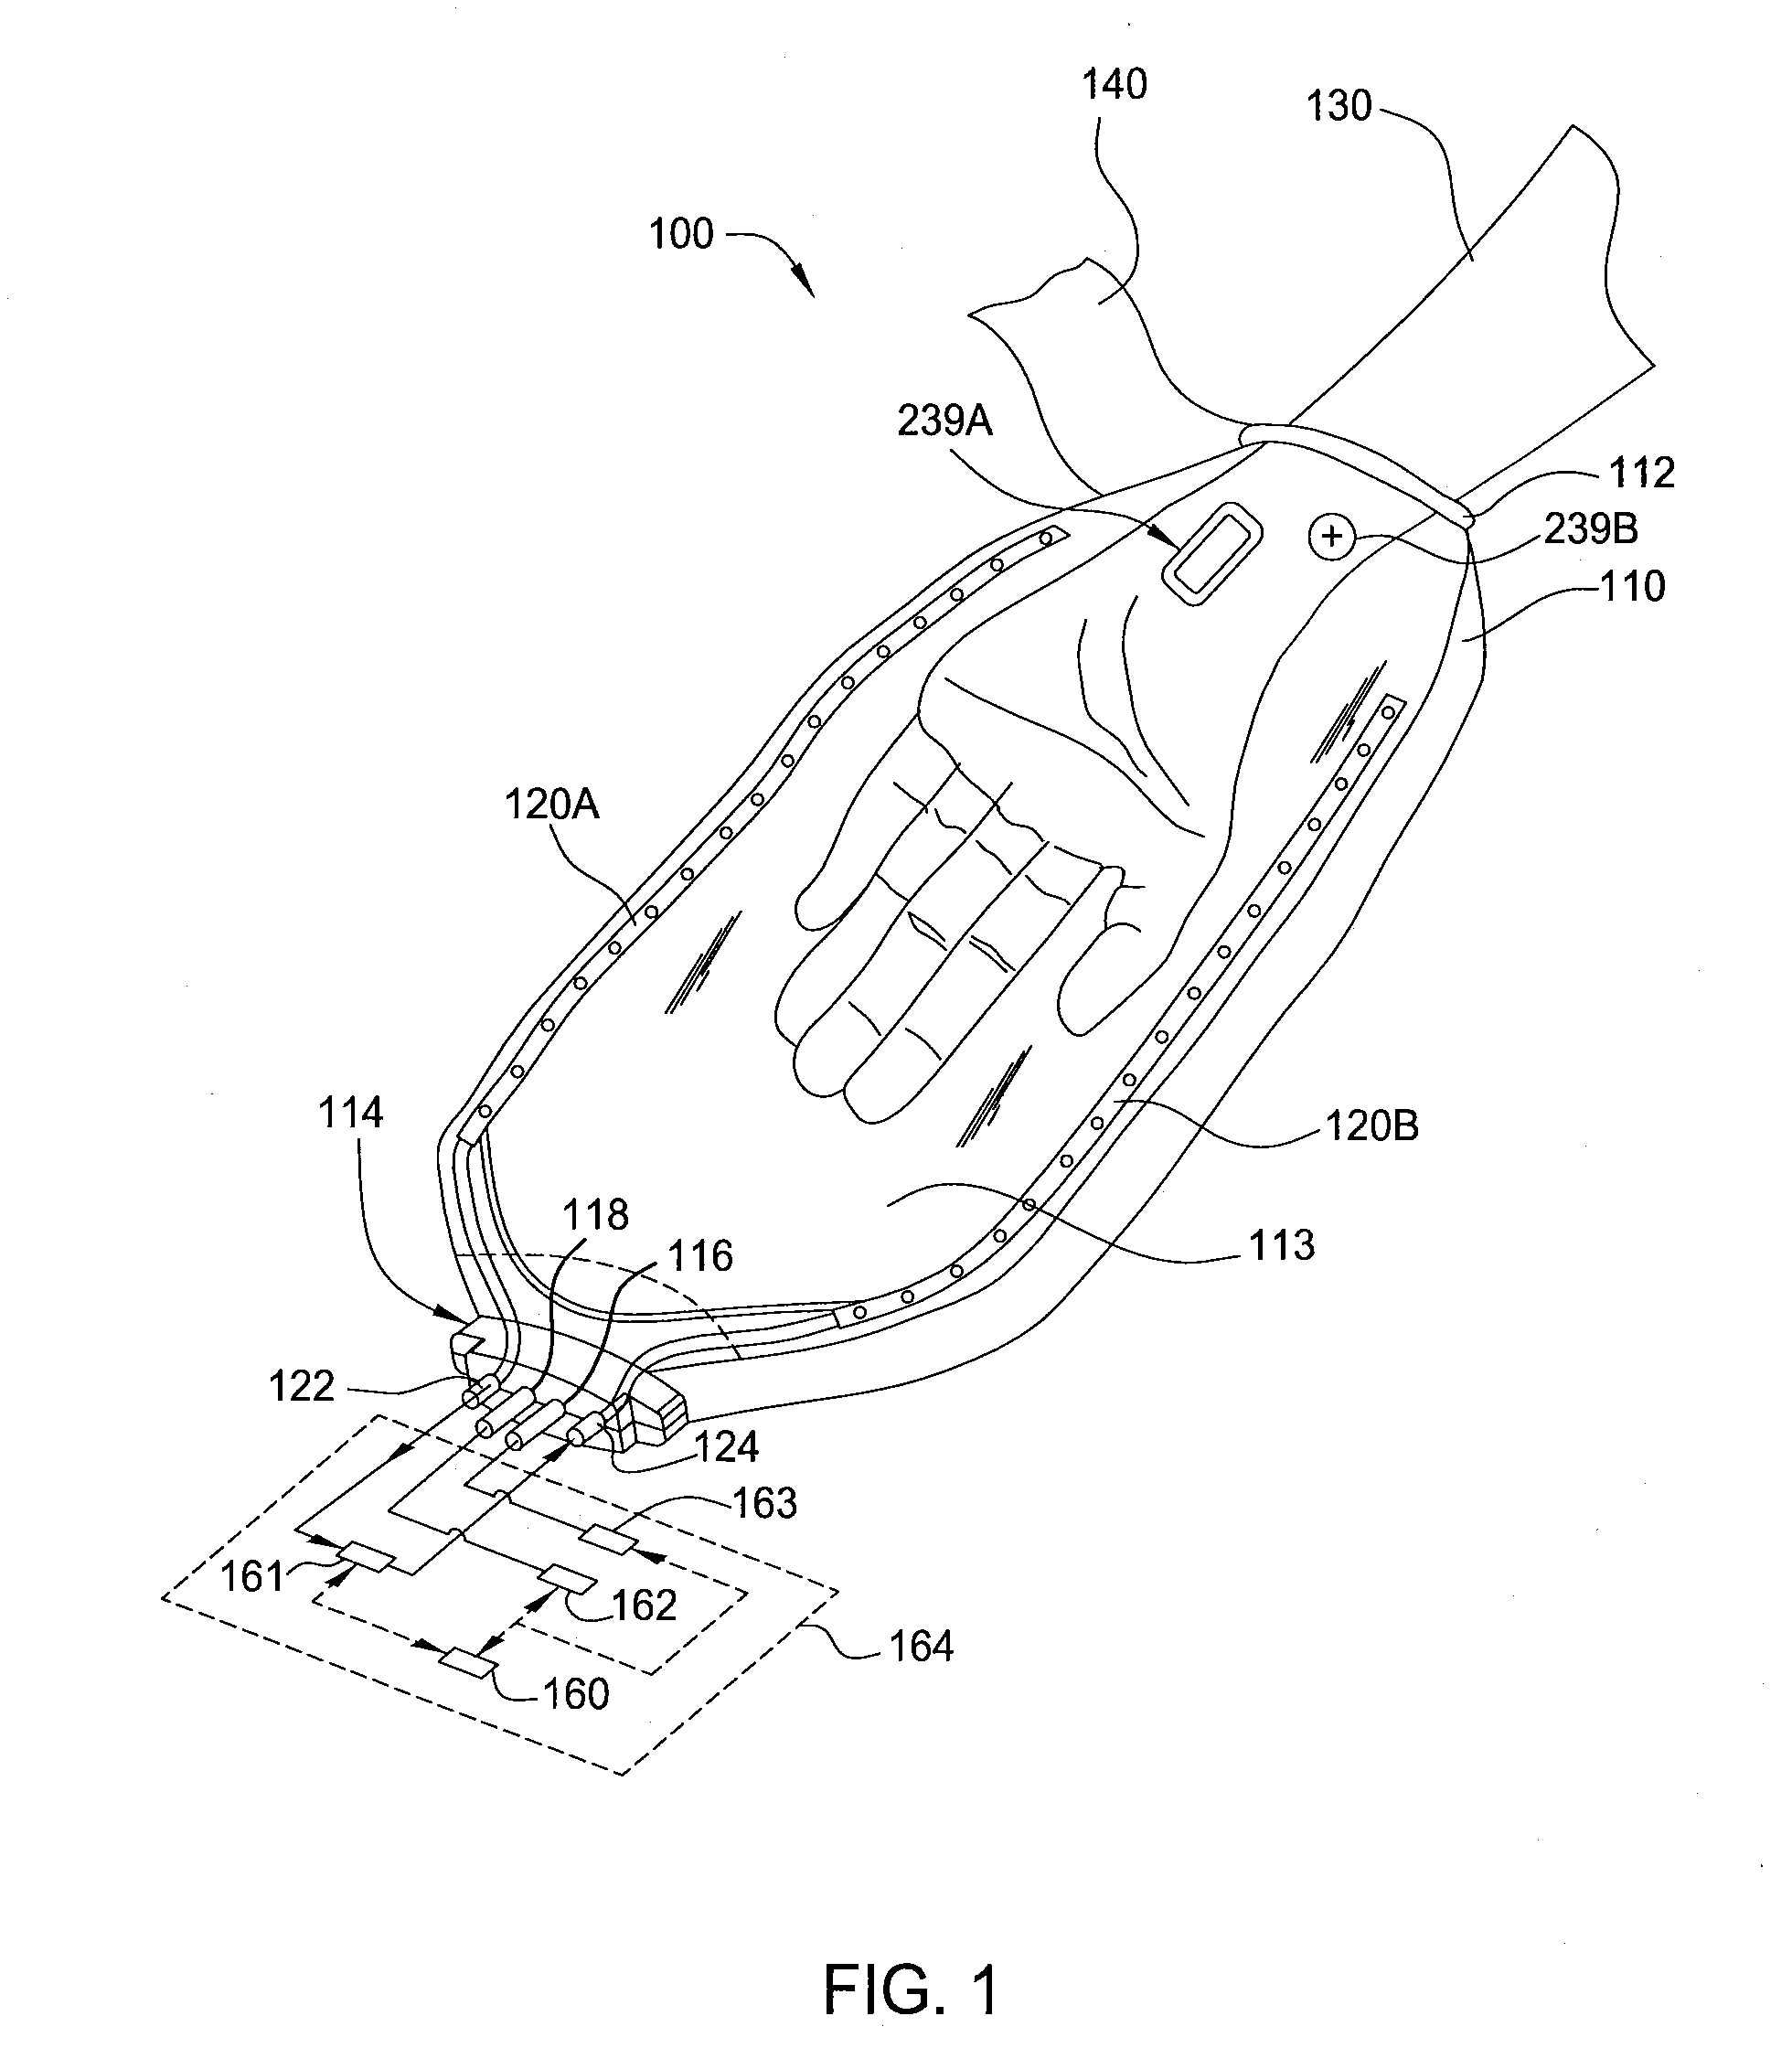 Methods and apparatus for enhancing vascular access in an appendage to enhance therapeutic and interventional procedures